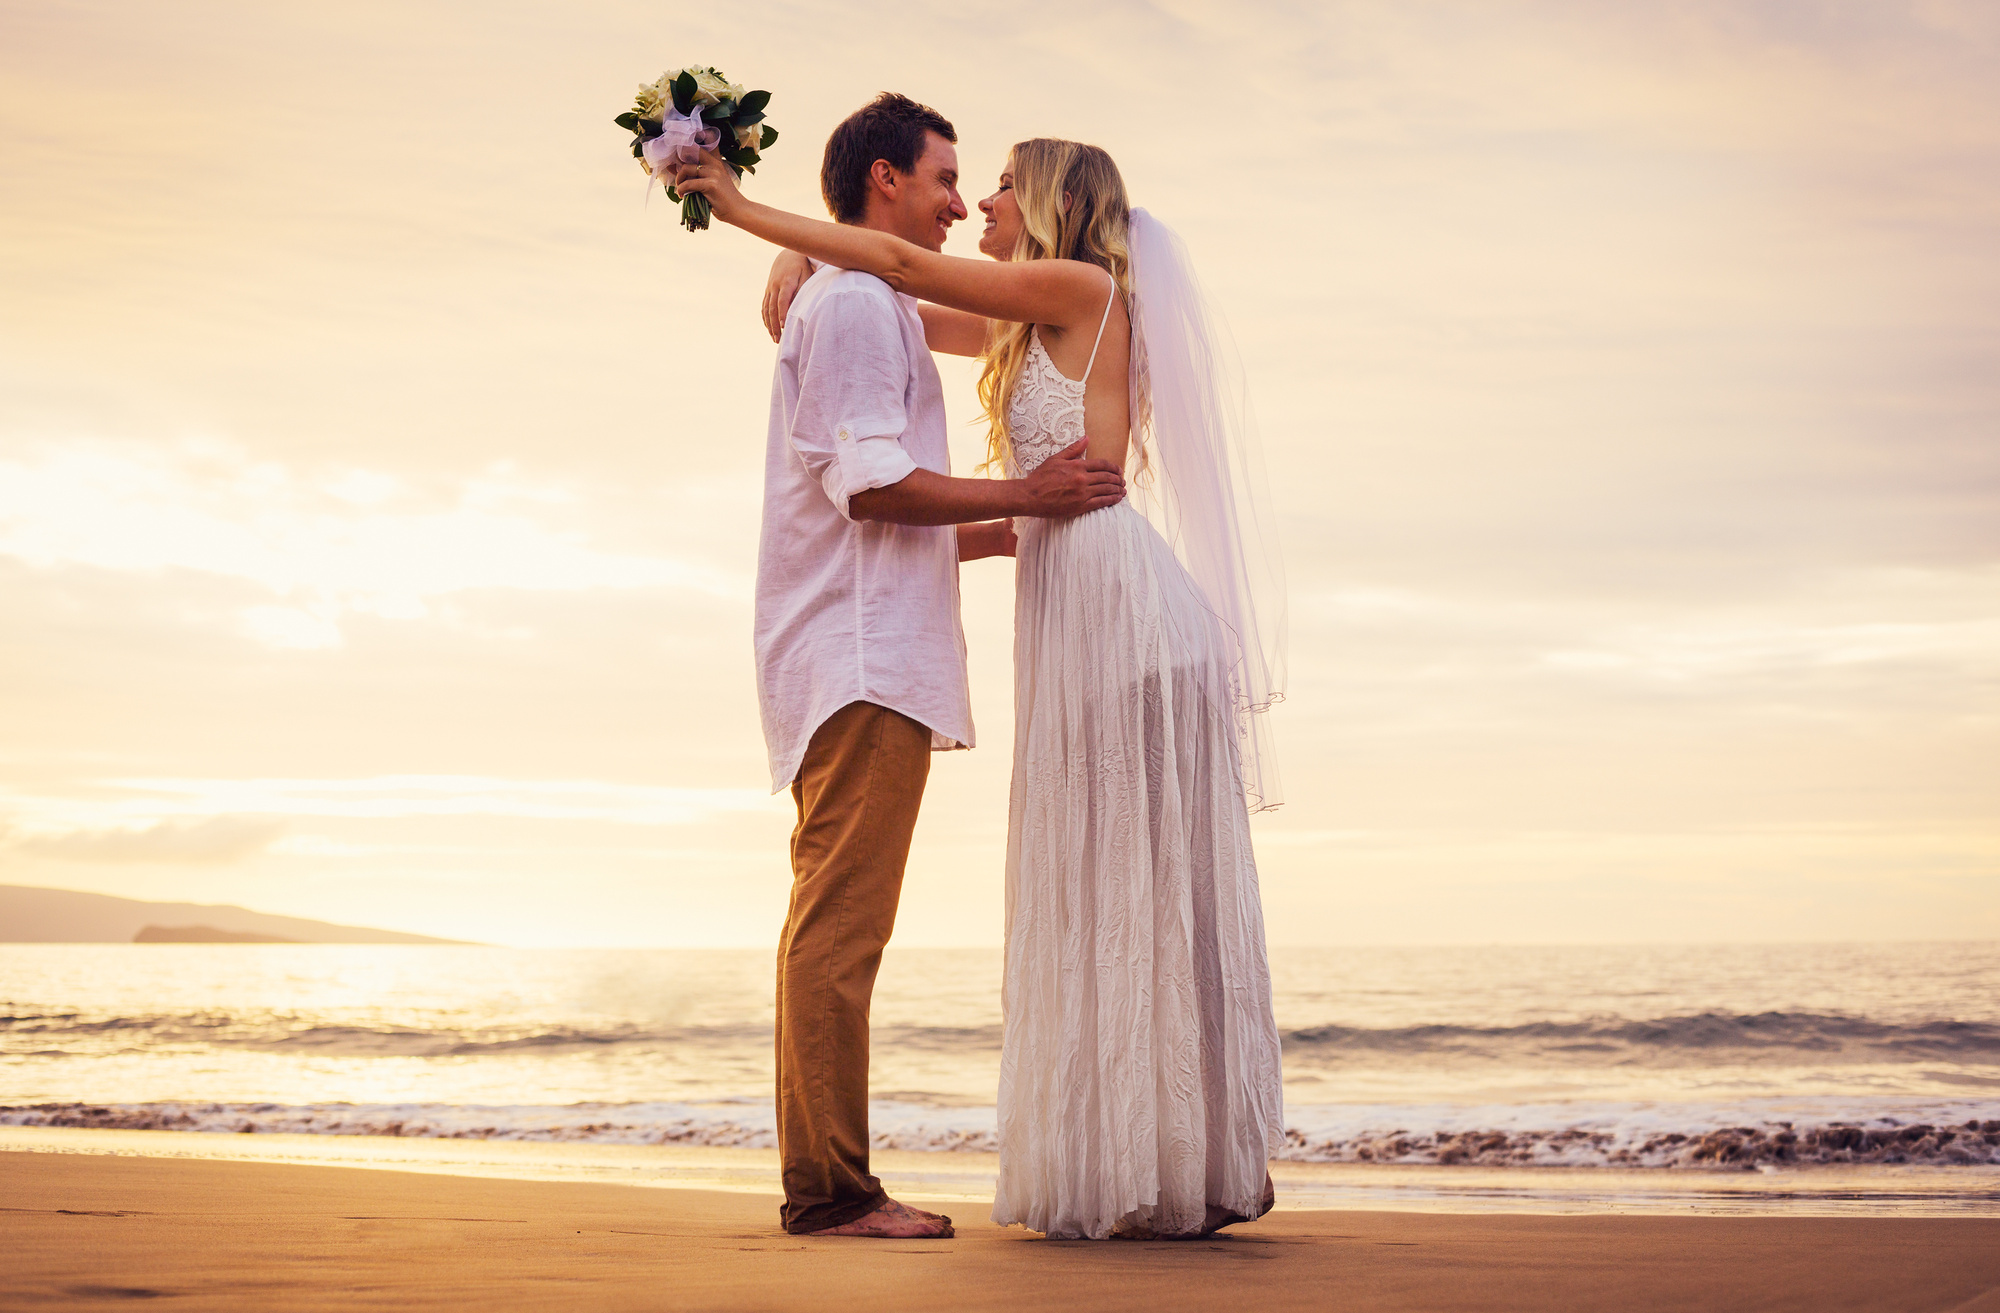 Bride And Groom On Beach At Sunset